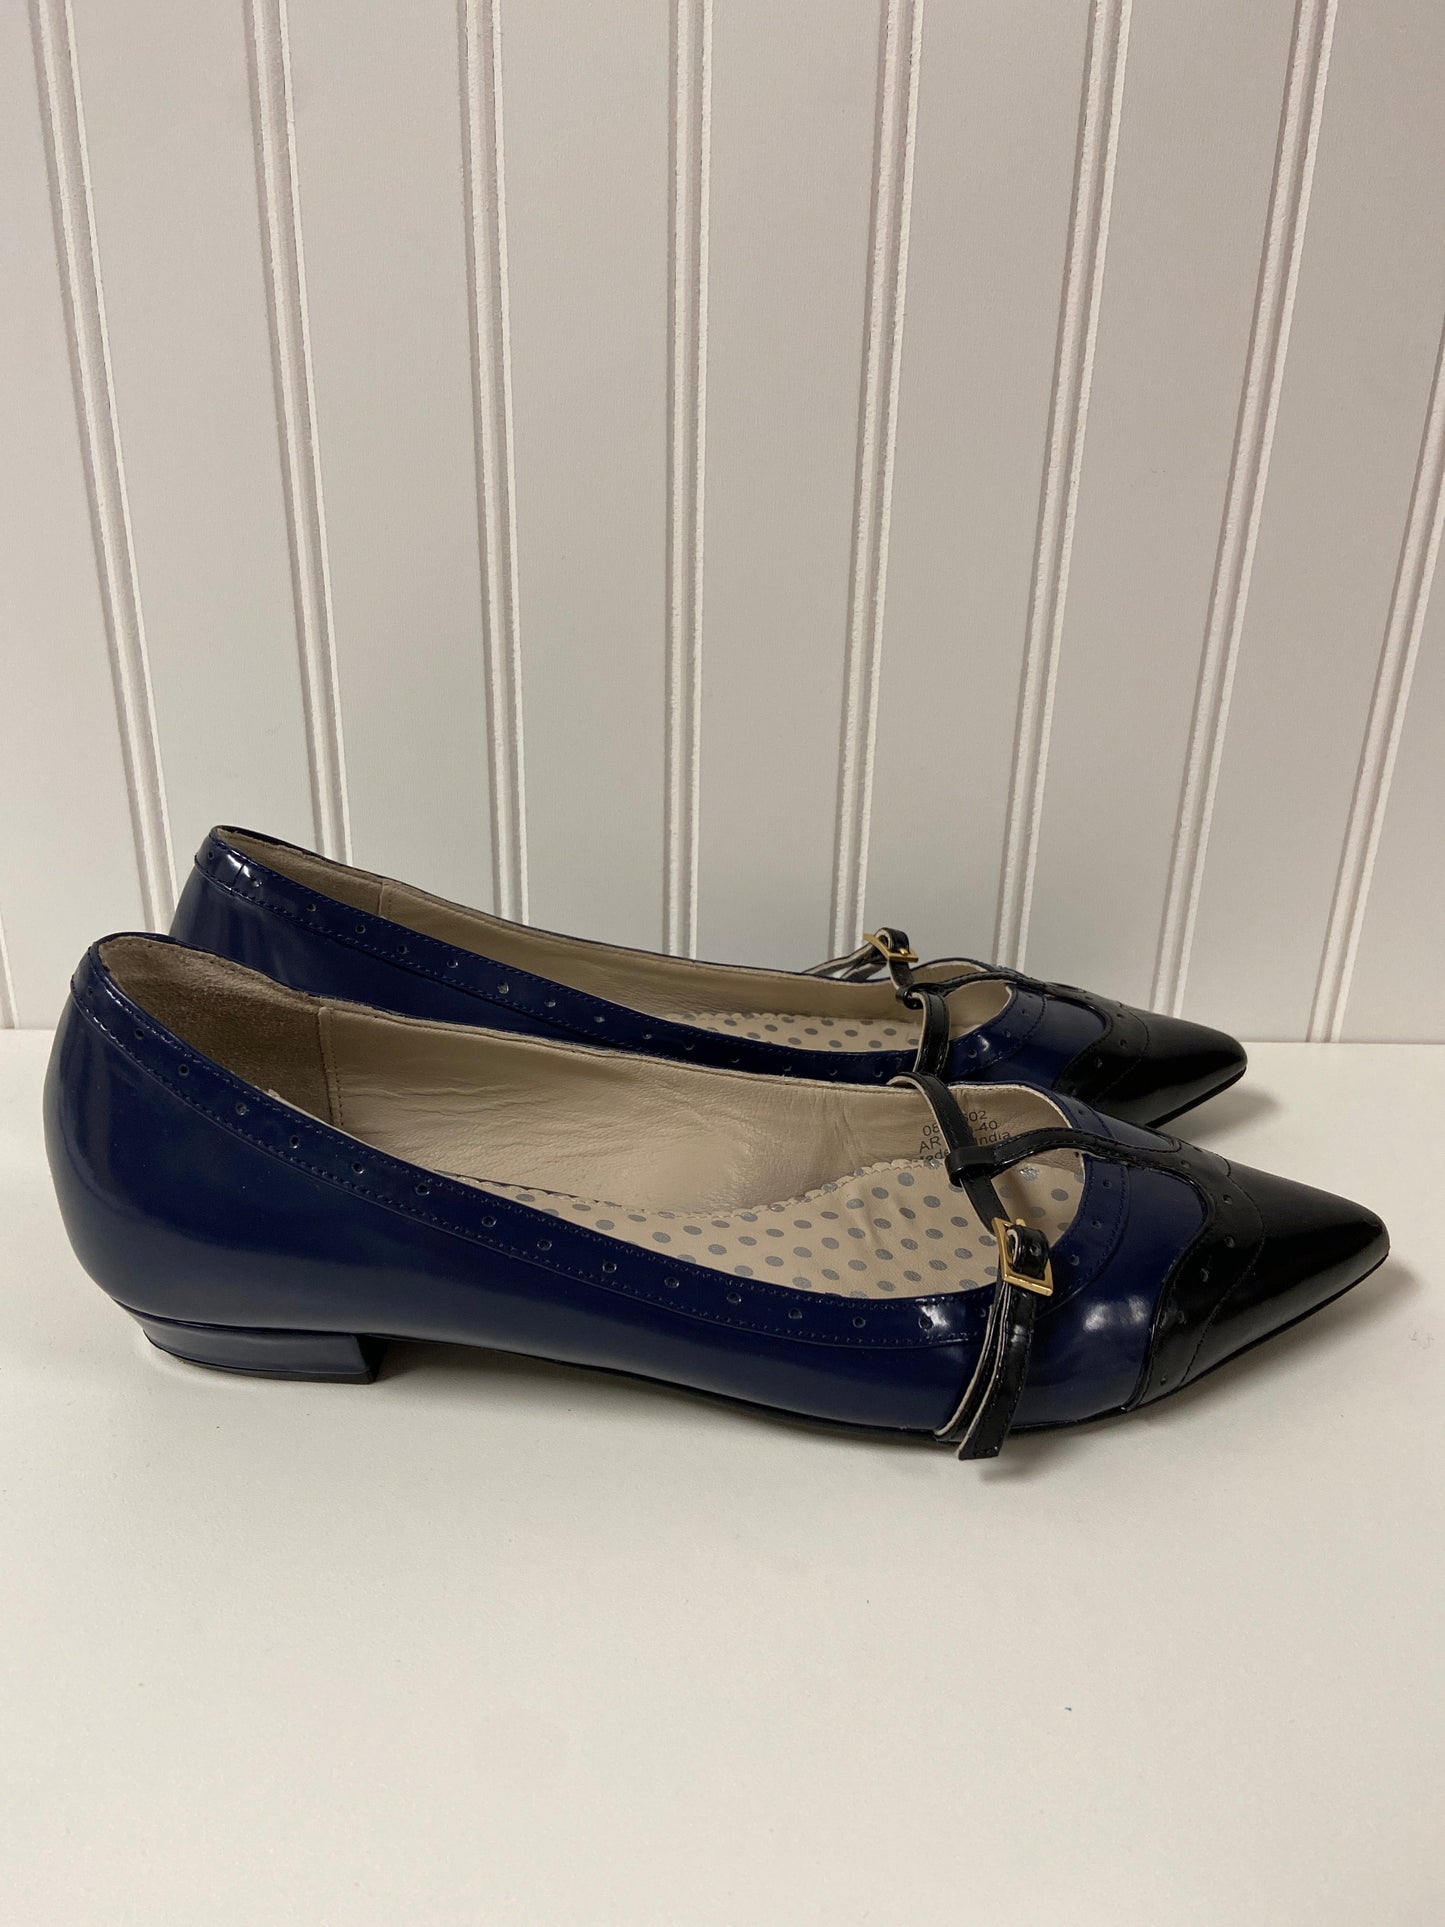 Shoes Flats By Boden  Size: 9.5